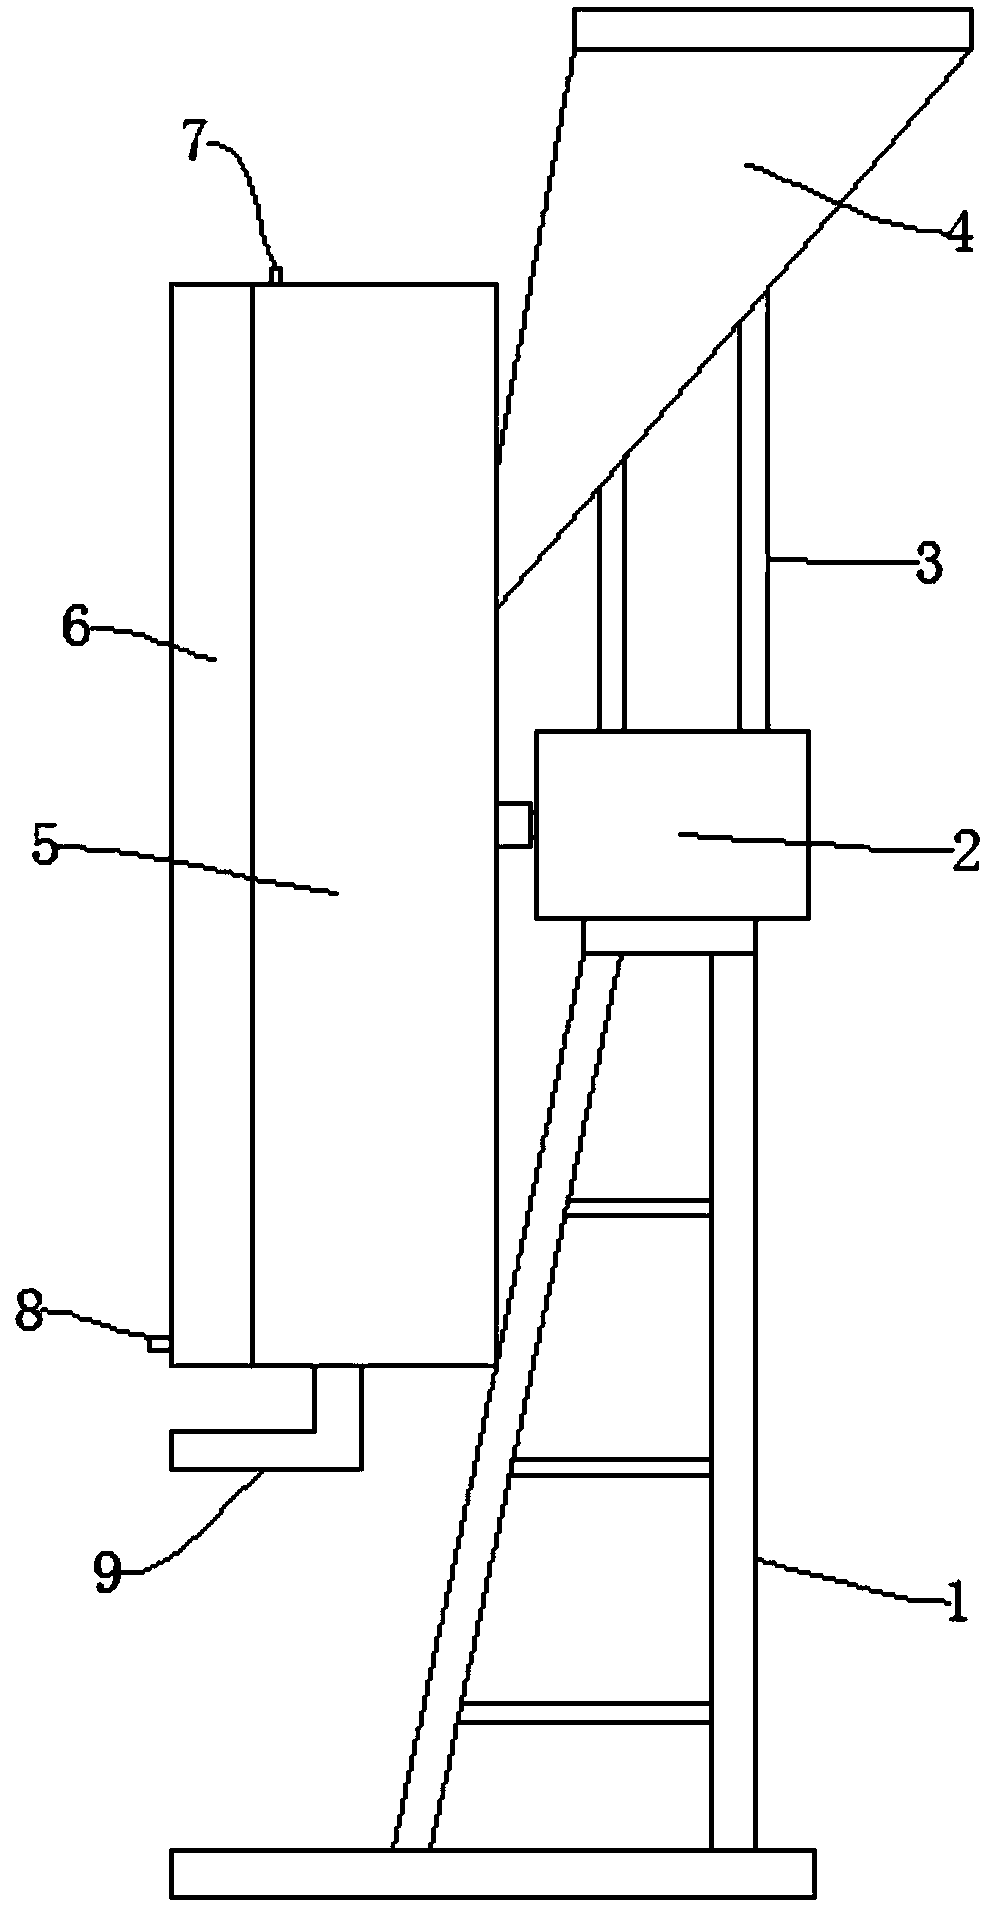 Water-cooled pulverizer for processing raw materials for food production